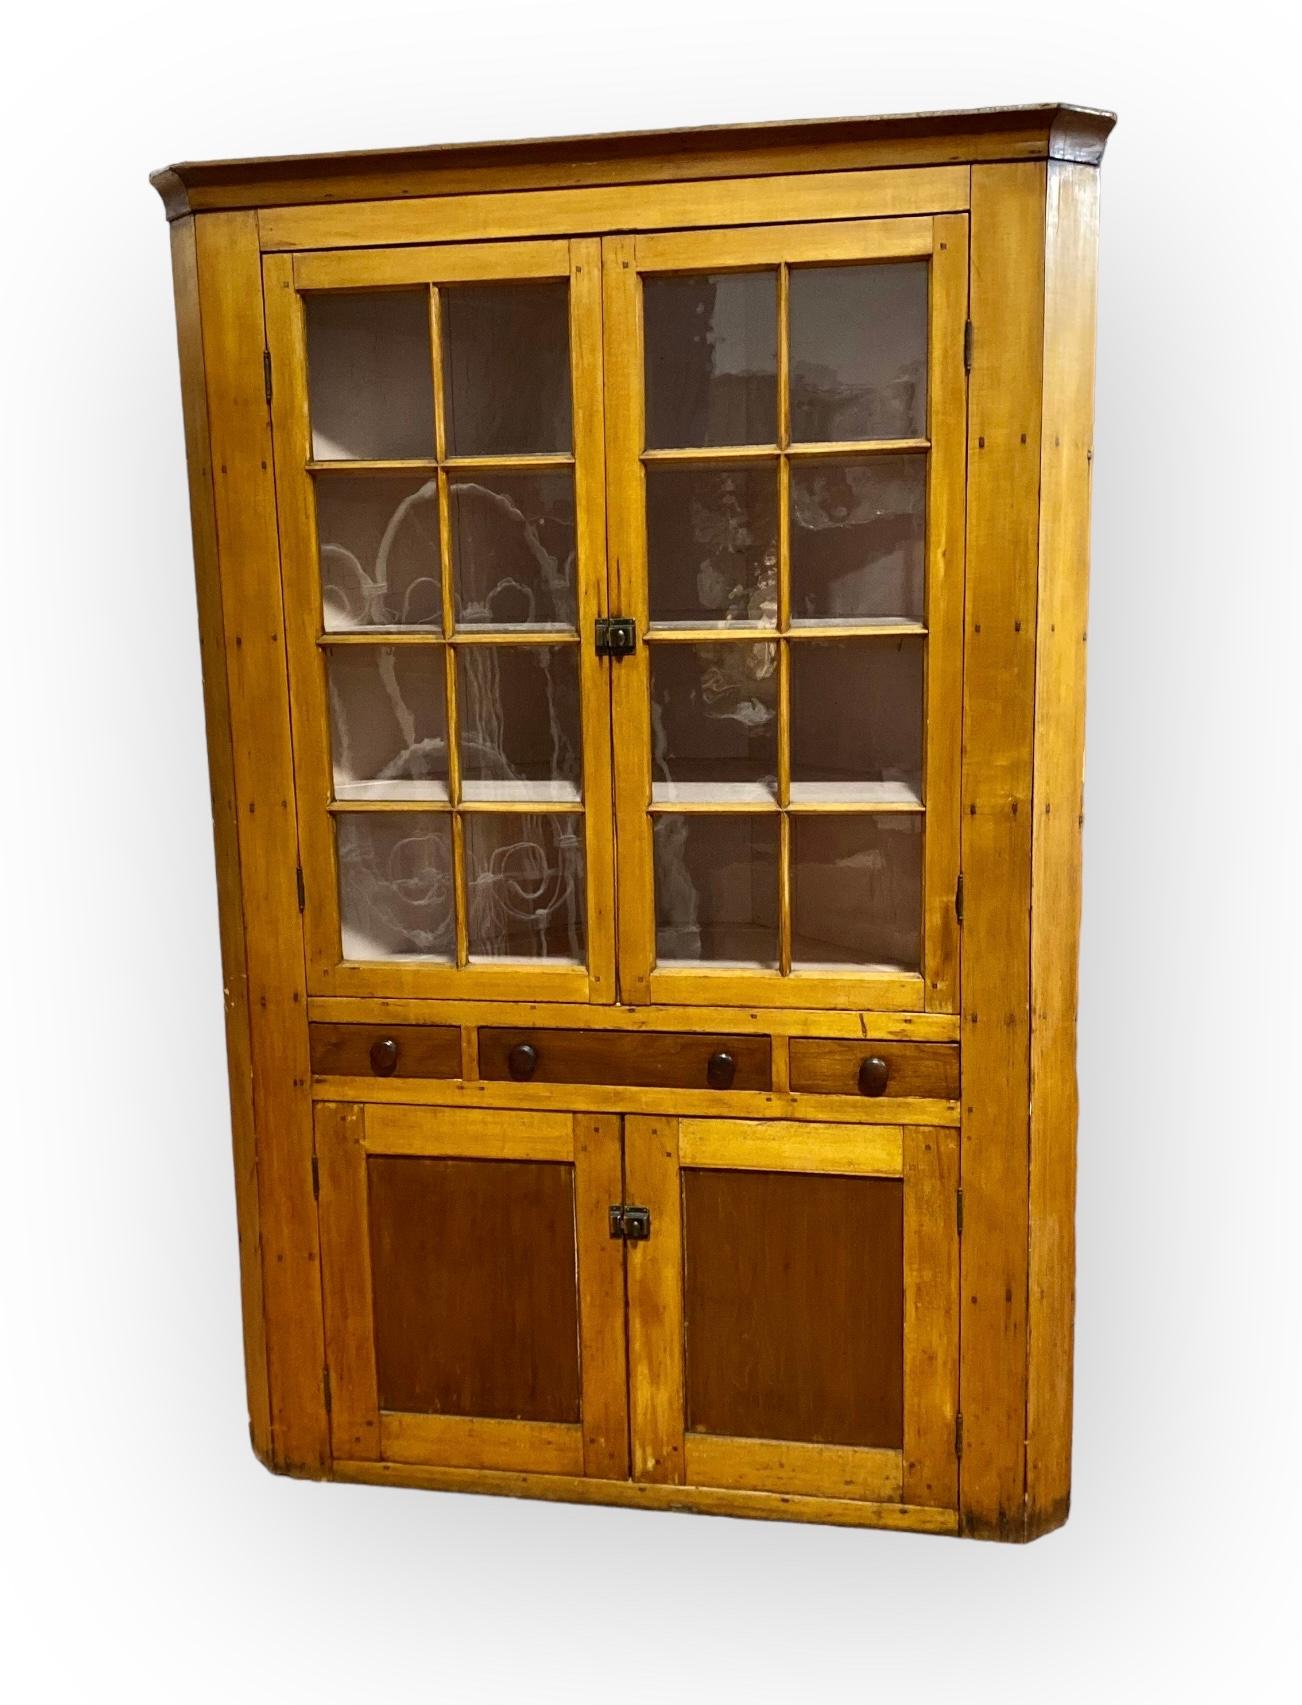 American Classical Antique Early 19th C. American Maple And Pine Corner Cabinet